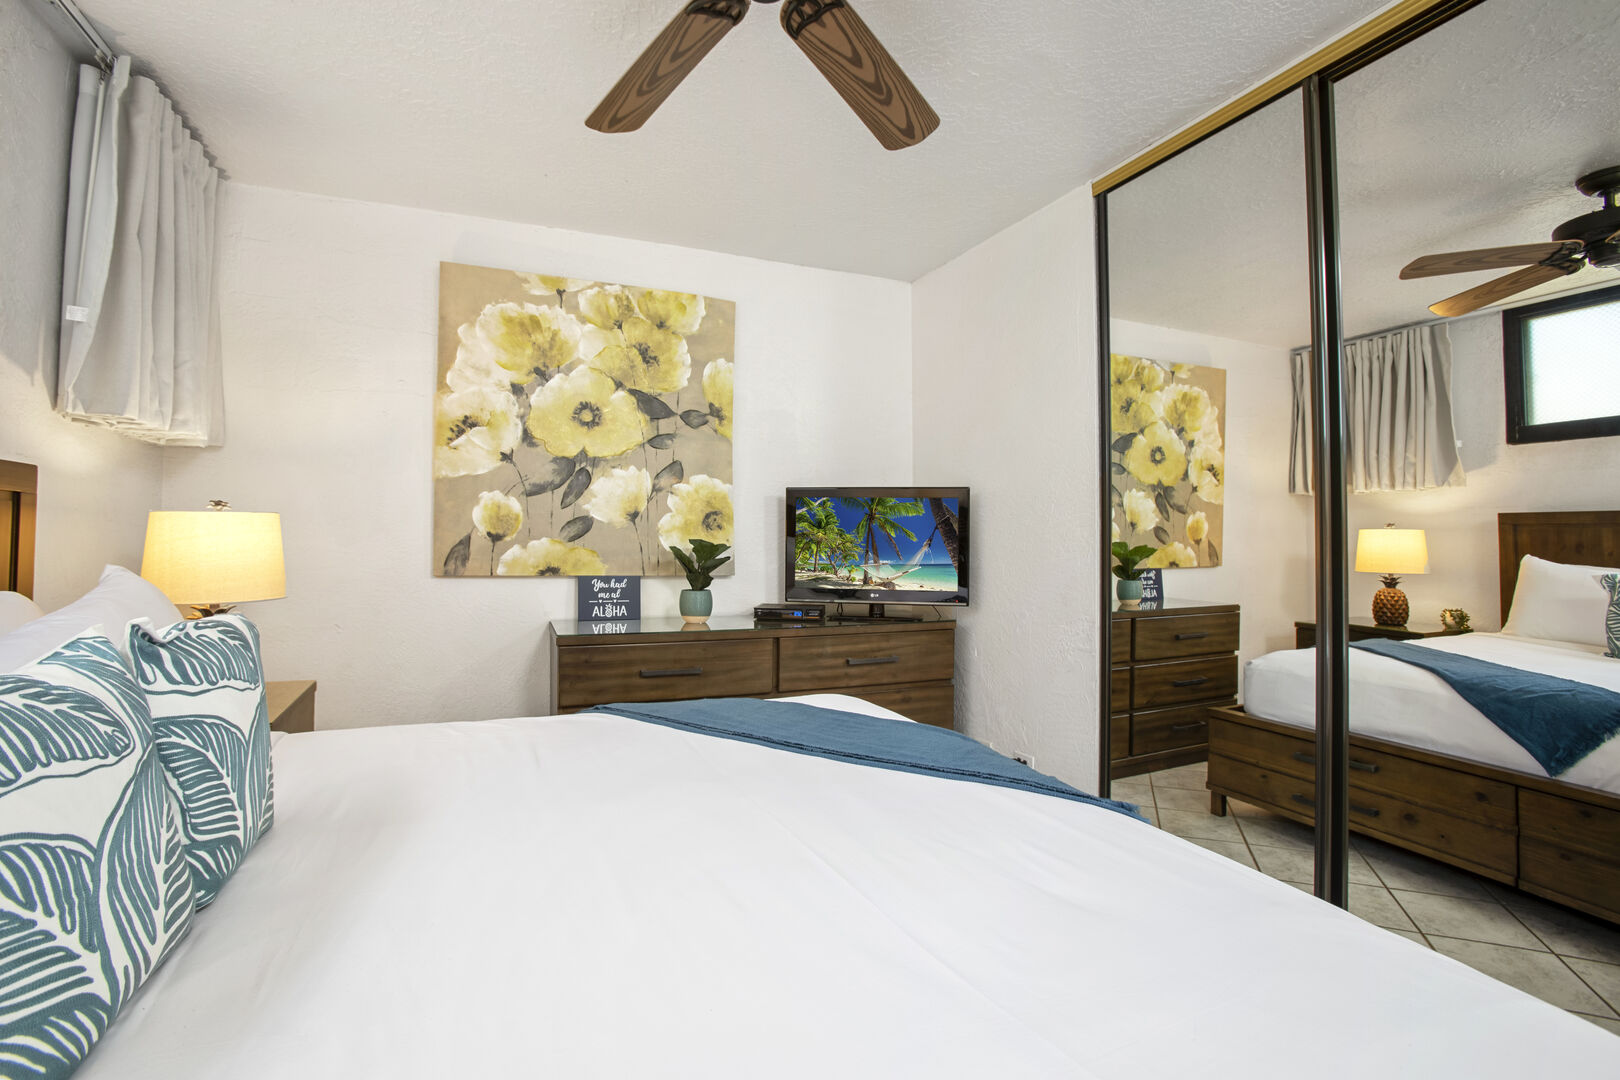 The bedroom features a king-size bed, ceiling fan, flat screen TV, nightstand, closet and dresser!